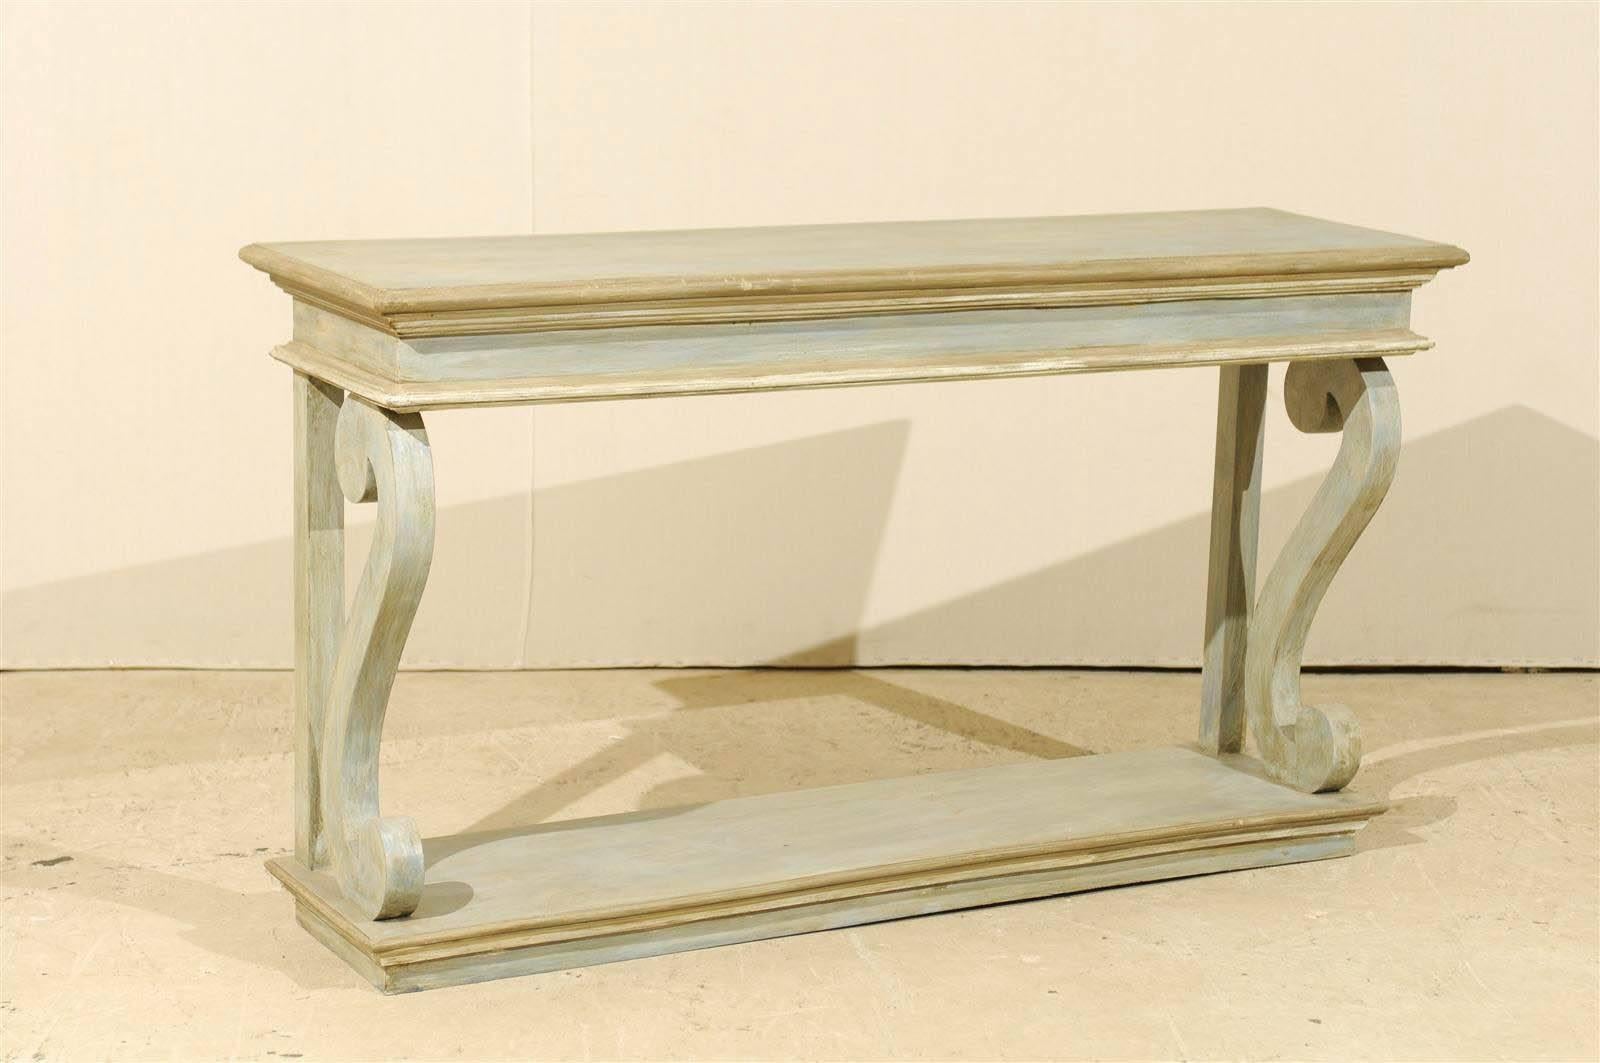 One hand carved painted wood Brazilian console made of reclaimed wood with voluted supports and lower tier. Nice clean look balanced by the elegance of the volutes. The color is a mix of blue, grey and green. The trim is more of a taupe hue. We have